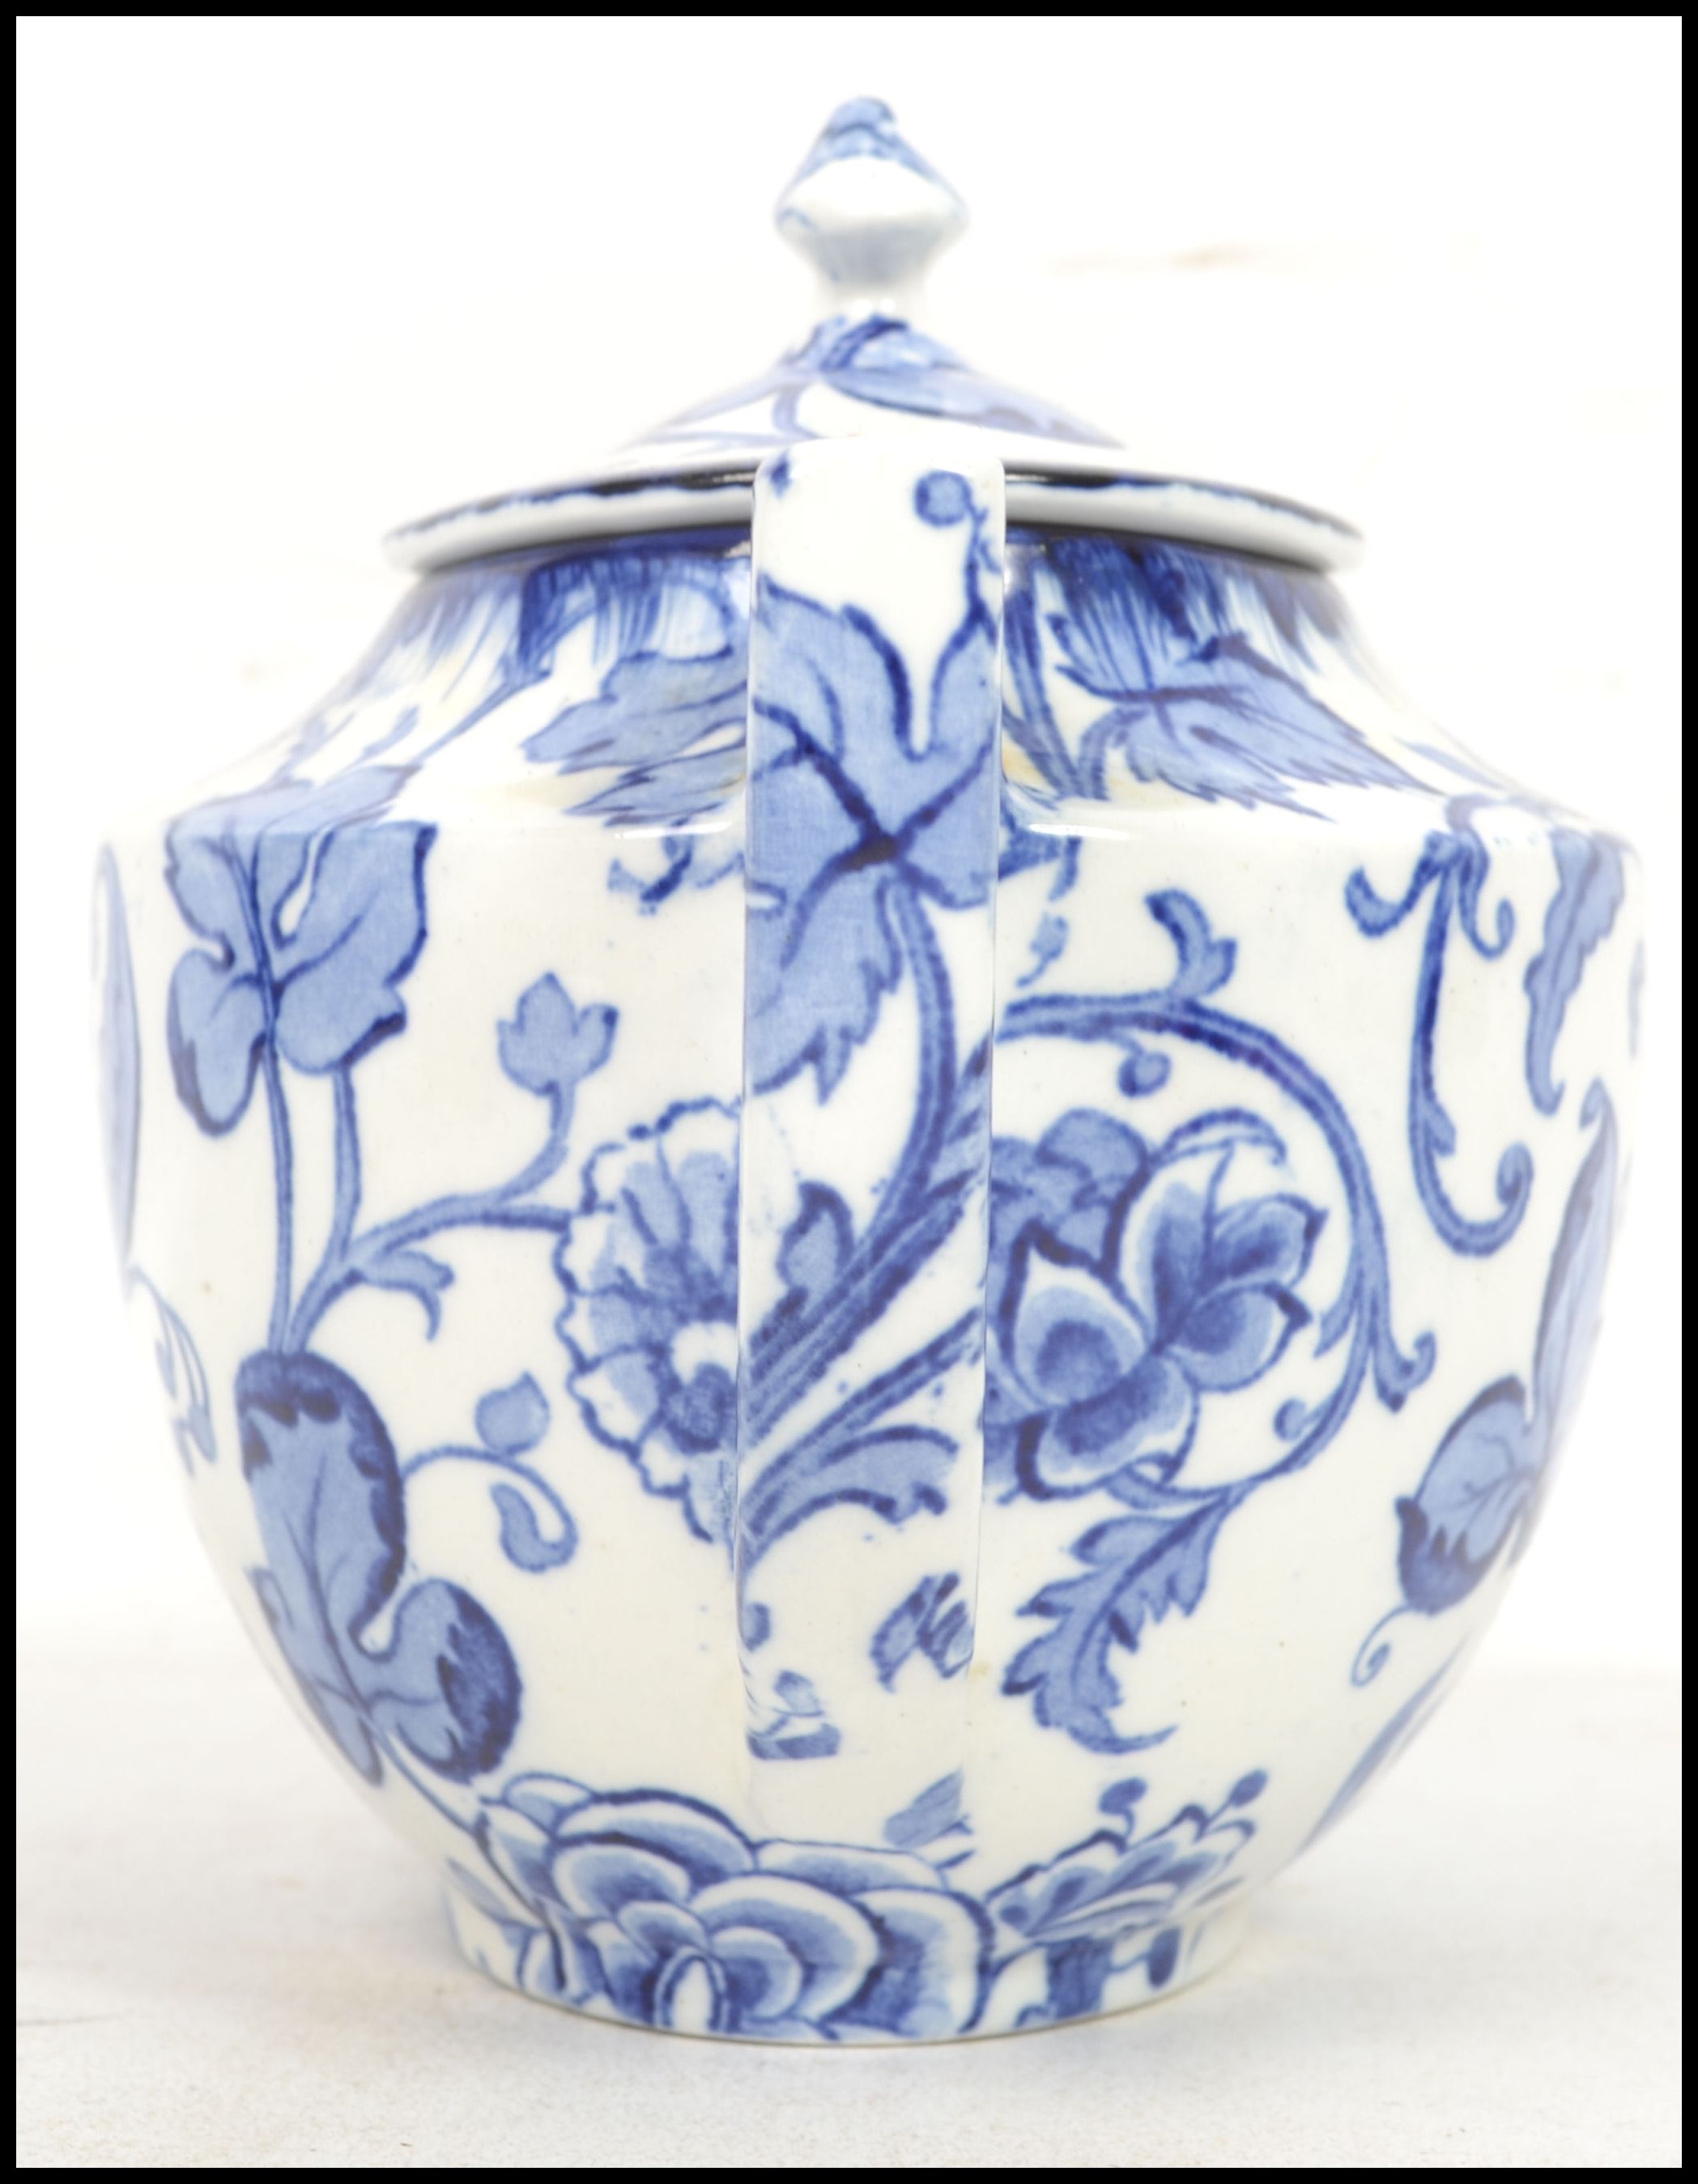 An early 20th century blue and white ceramic teapot of traditional form with shaped handle and spout - Image 4 of 7